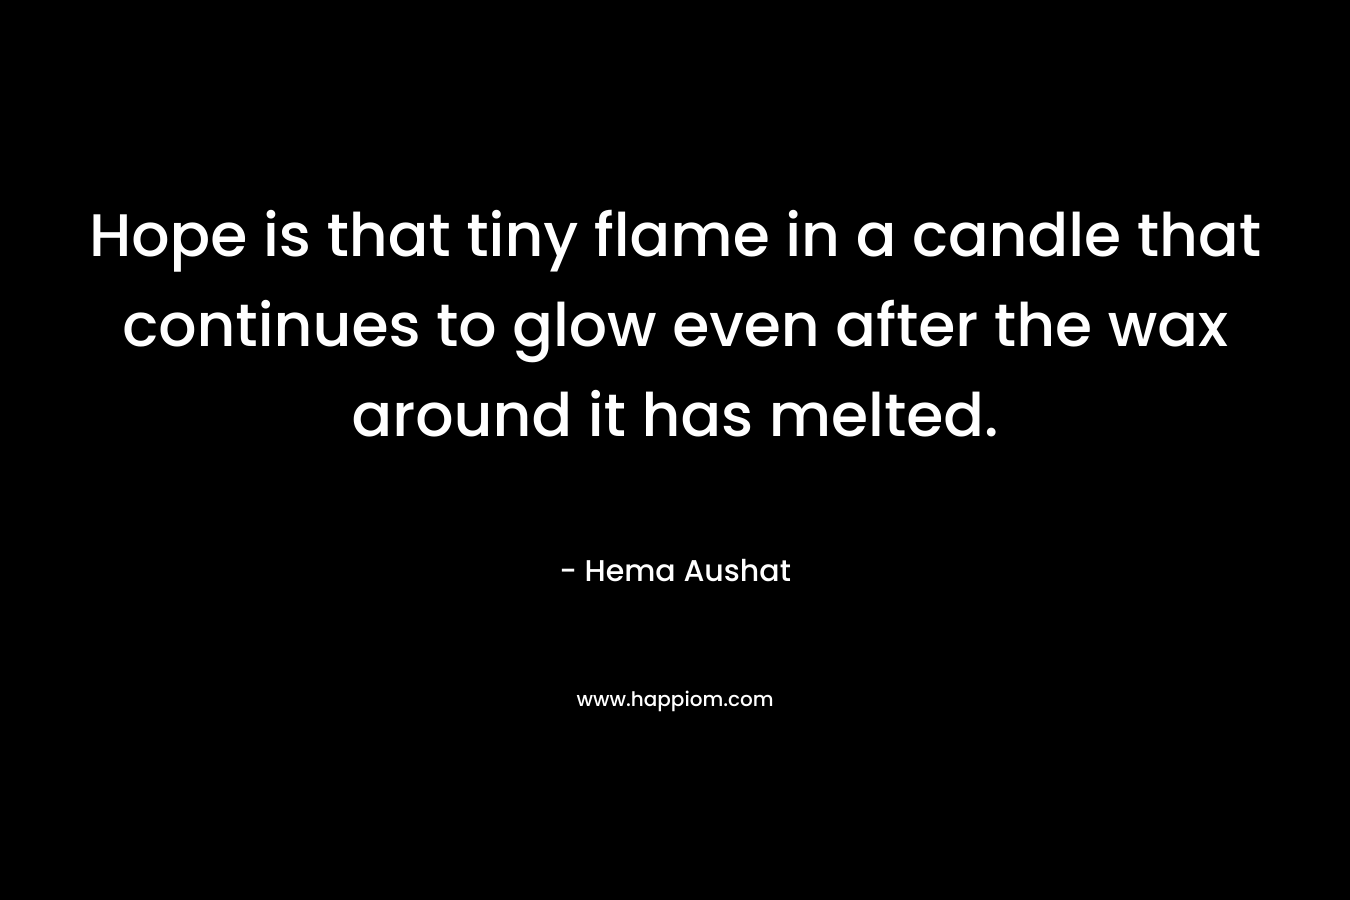 Hope is that tiny flame in a candle that continues to glow even after the wax around it has melted.